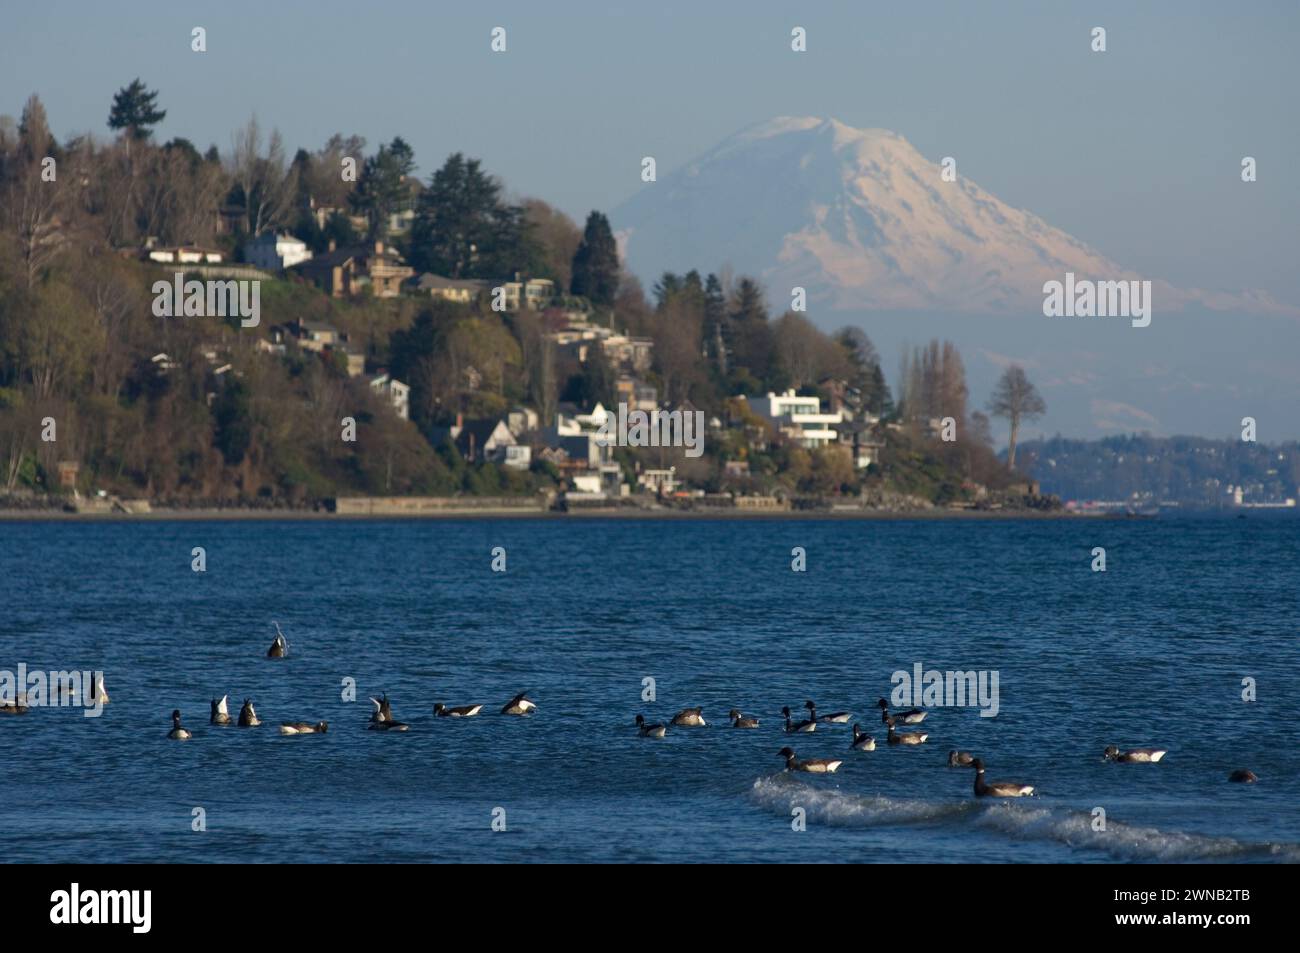 Brant geese Branta bernicla nigricans feeding resting traveling along the rocky shores Puget Sound Salish Sea migration stop Discovery park Washington Stock Photo